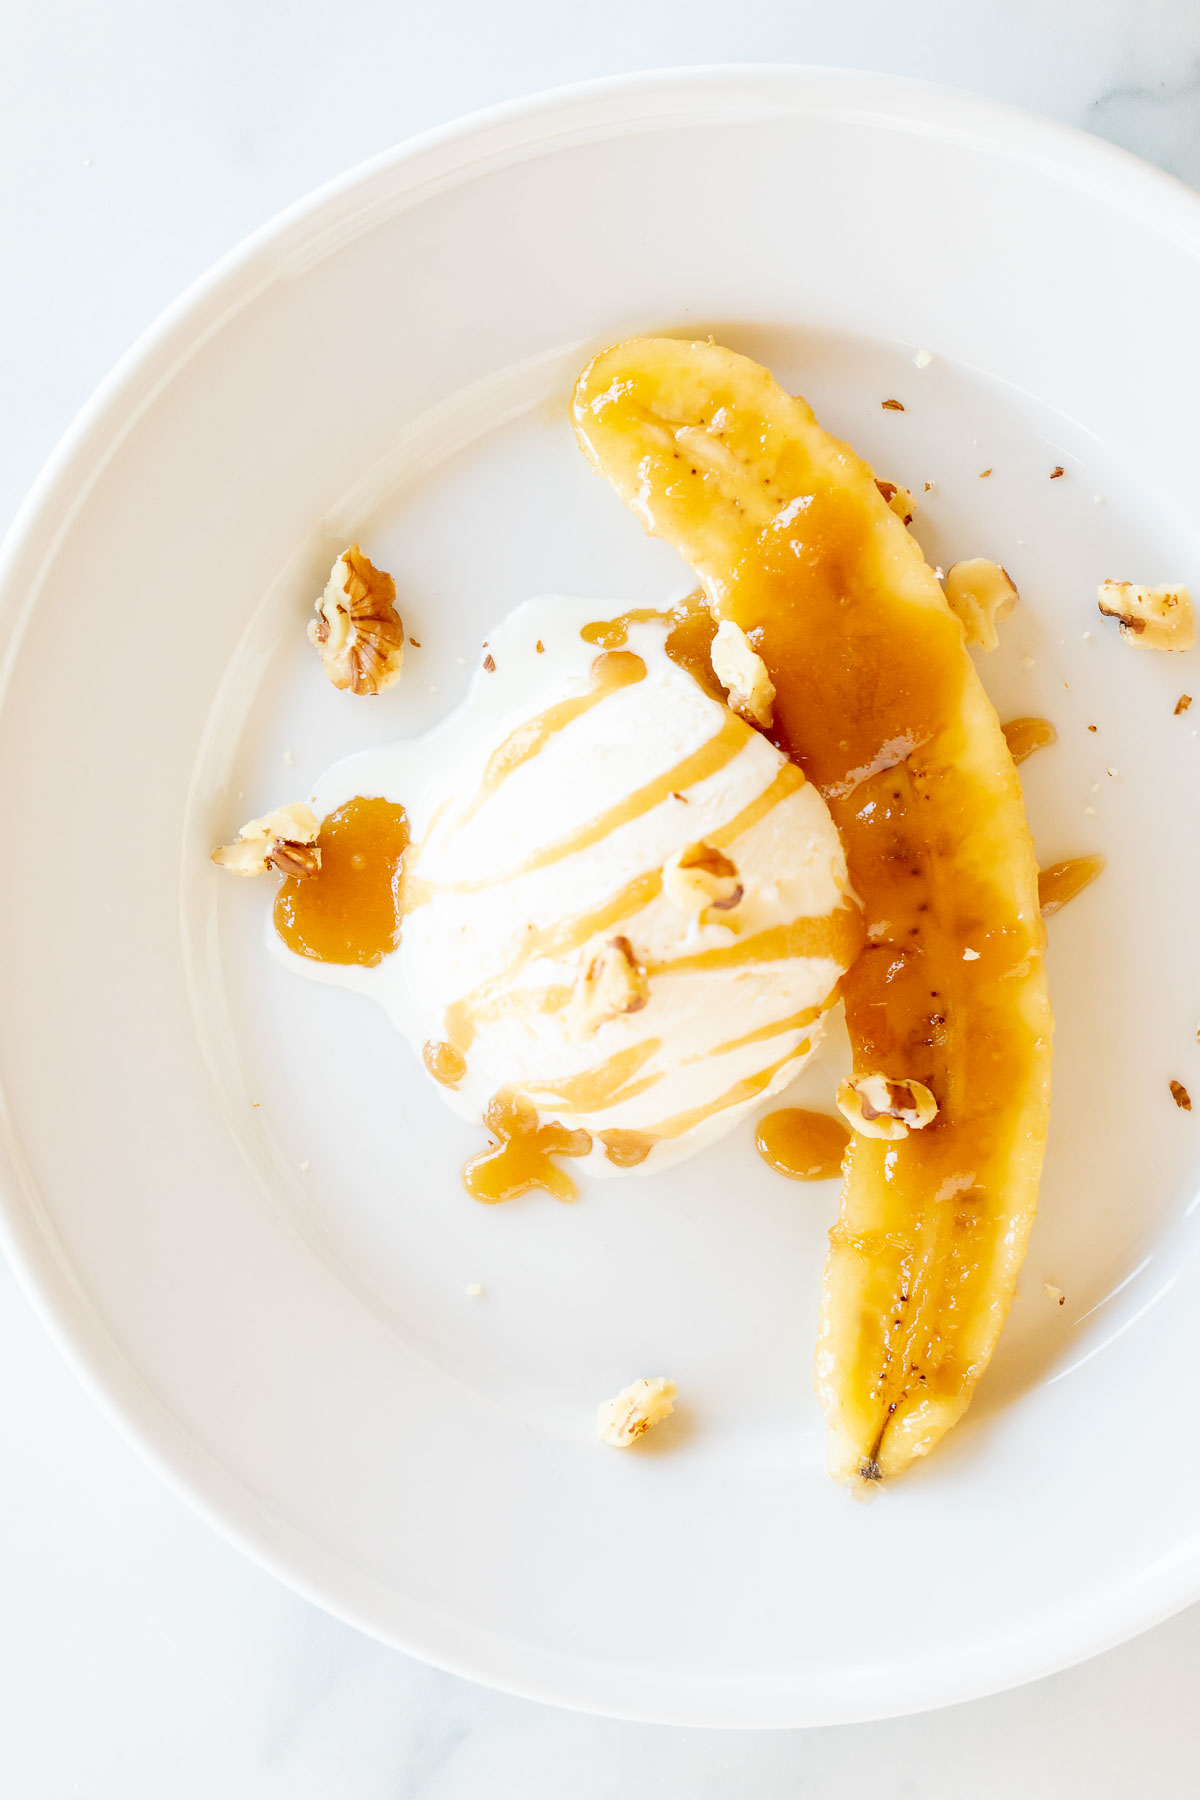 A white plate with a scoop of ice cream and a banana slice, perfect for making delicious Bananas Foster dessert.